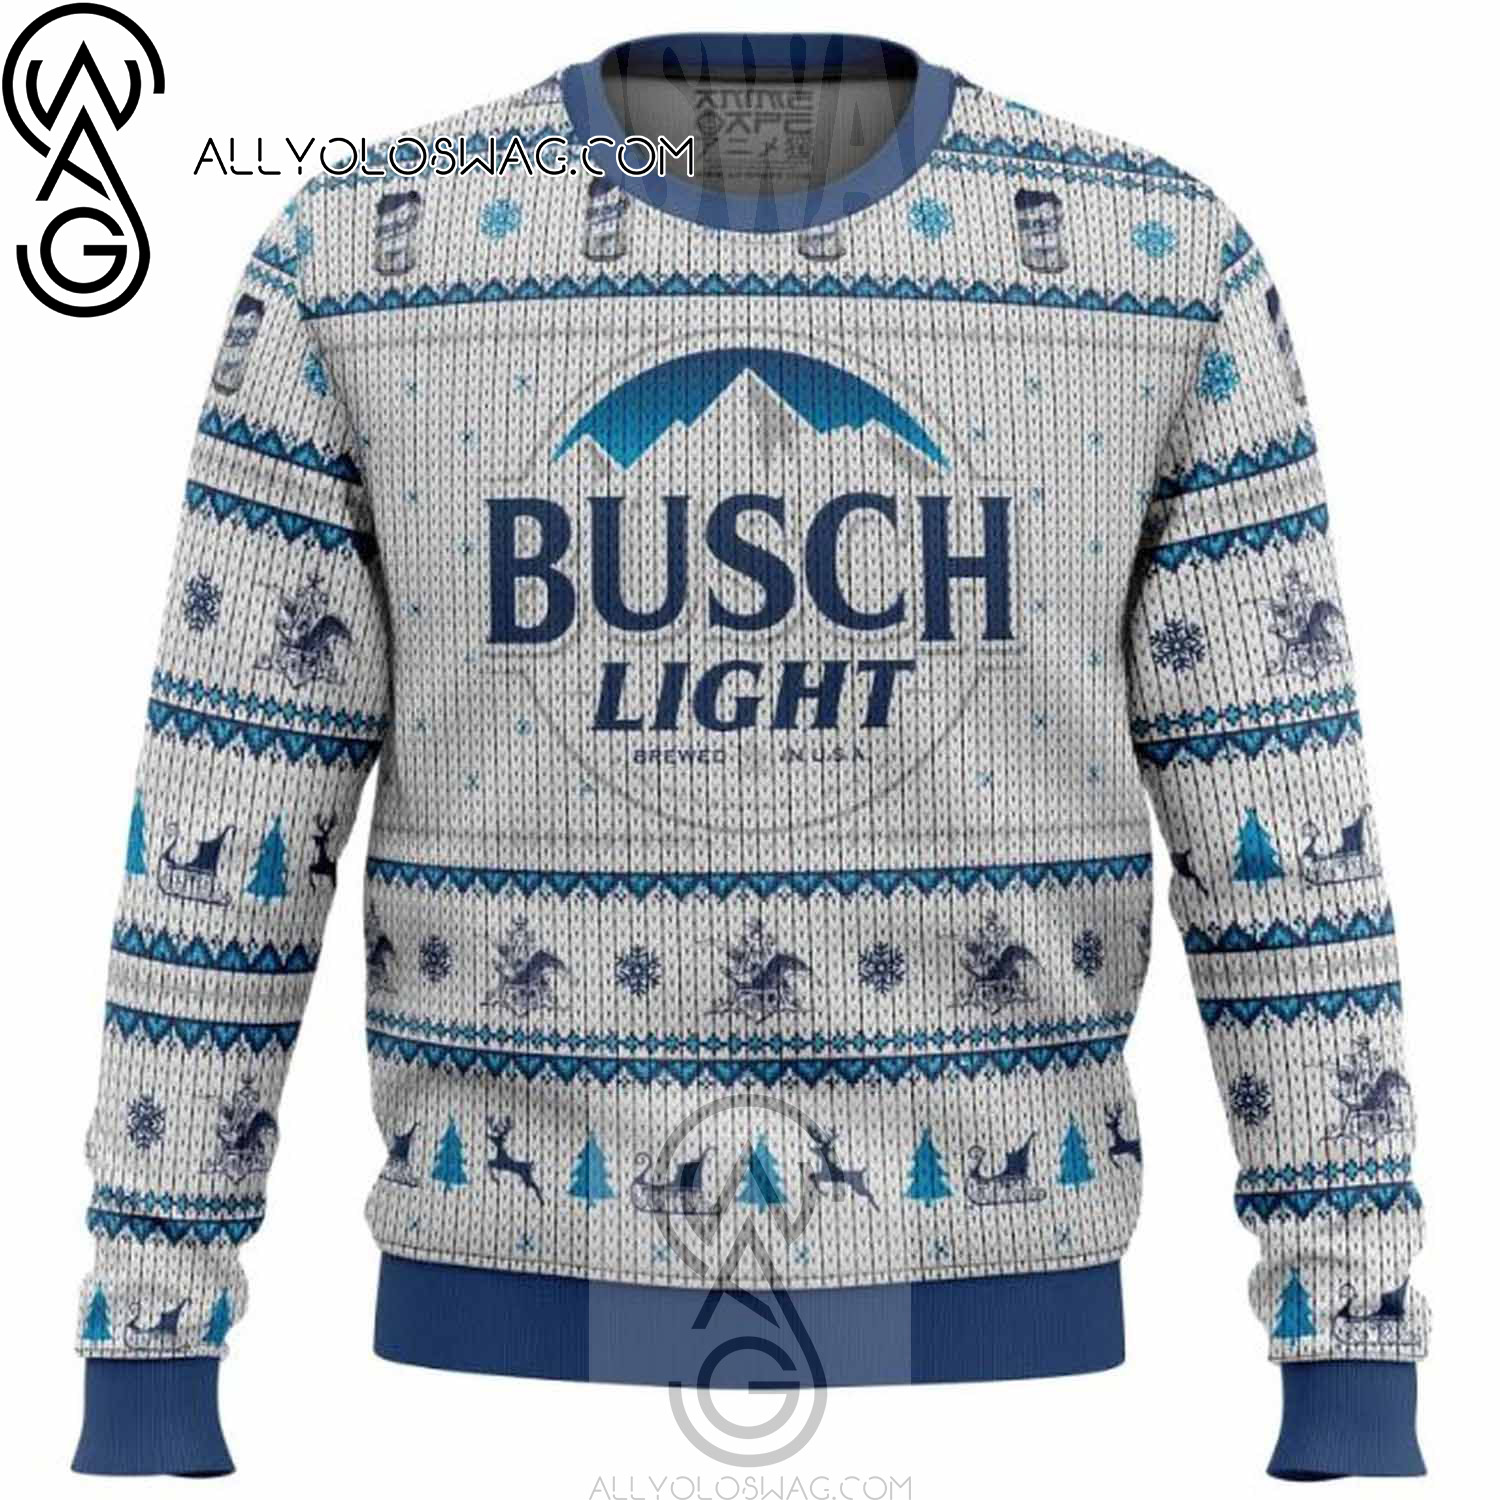 Busch Light Beer Full Printing Ugly Christmas Sweater